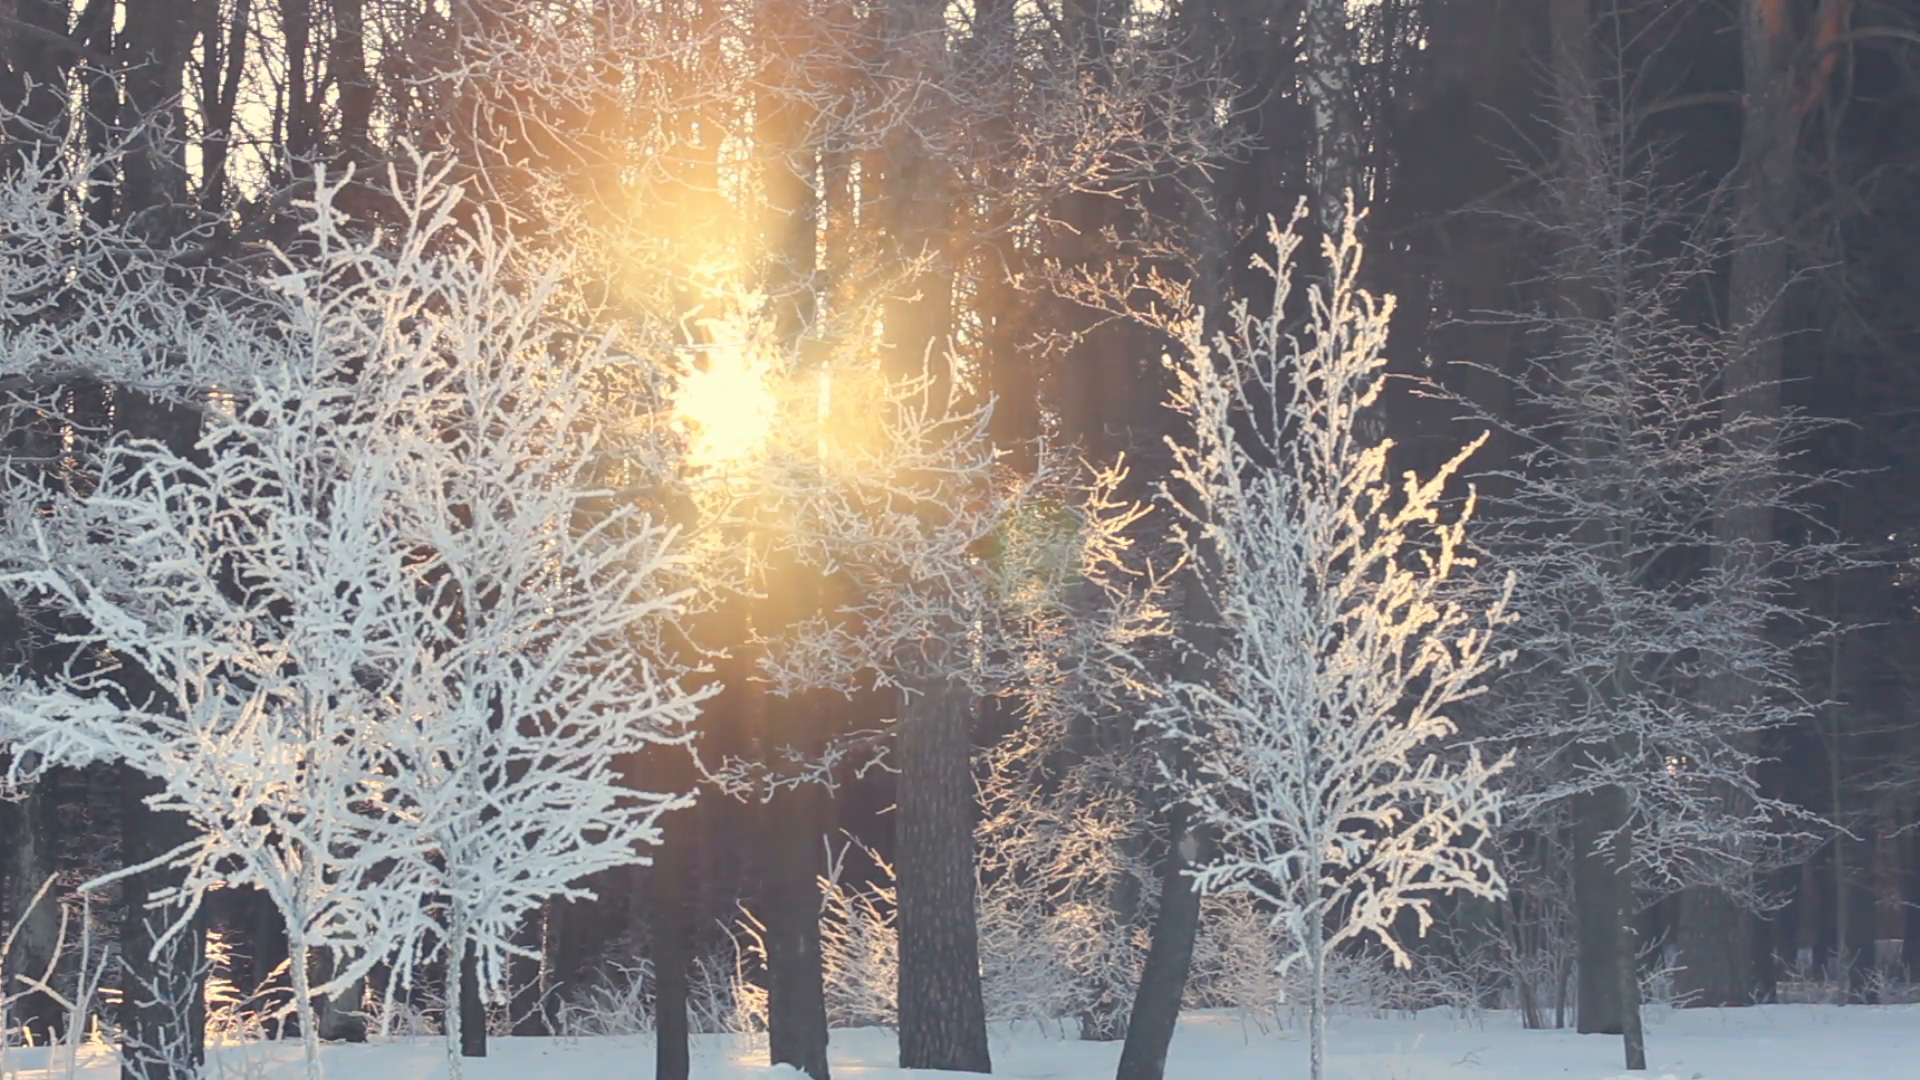 Sunset in winter forest. Sun rays shine through winter trees. Frosty ...